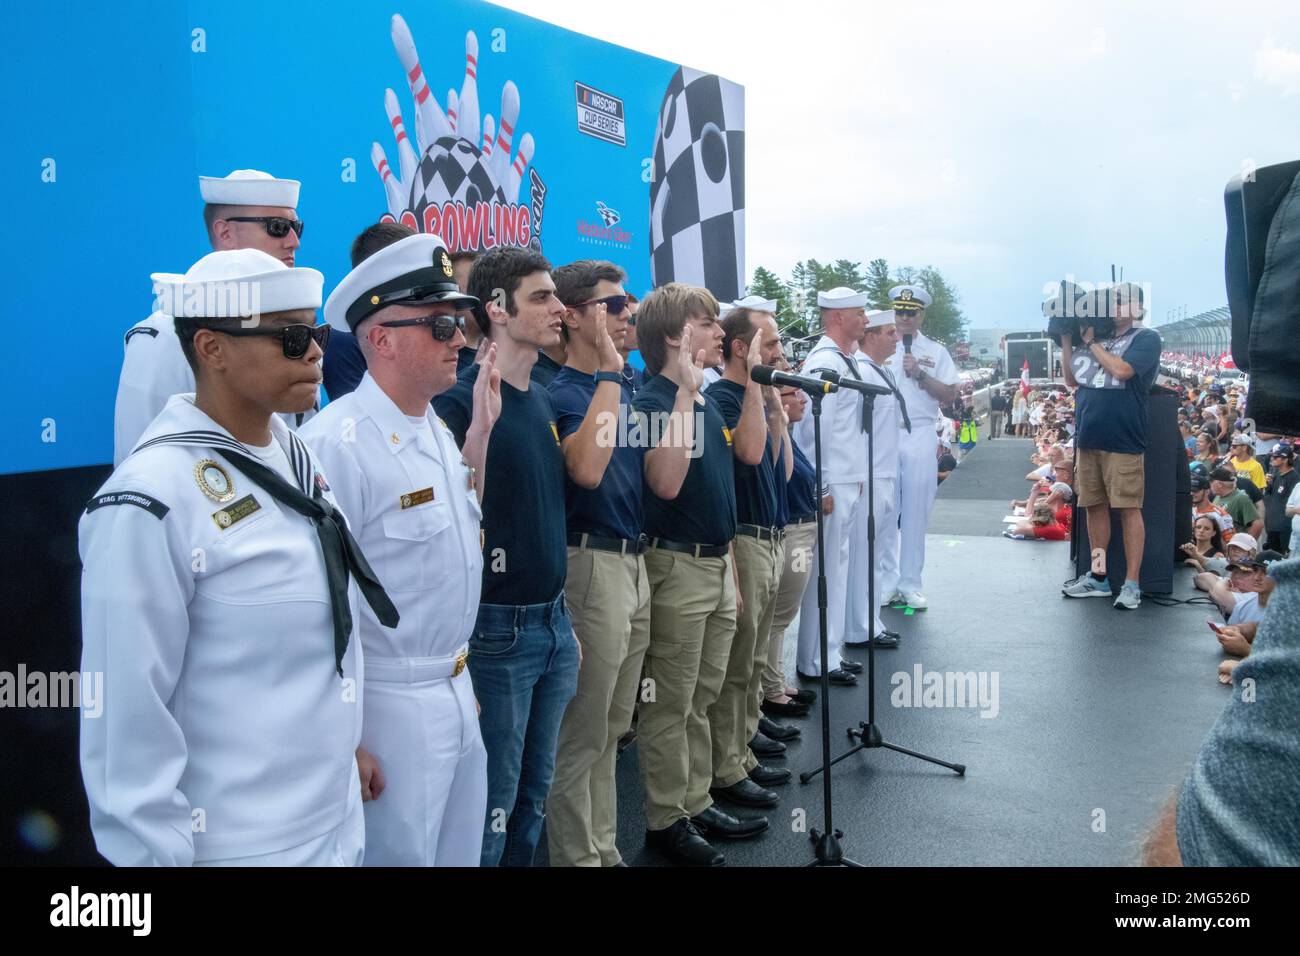 220821-N-IUK583-0054 WATKINS GLEN, N.Y. (August 21, 2022) — Cmdr. Christopher McCurry, commanding officer of Navy Talent Acquisition Group (NTAG) Pittsburgh, administers the oath of enlistment for eleven future Sailors at the Go Bowling at The Glen, NASCAR Xfinity Series race. NTAG Pittsburgh, part of Navy Recruiting Command, recruits the next generation of Navy Sailors throughout areas in Pennsylvania, New York, West Virginia, and Maryland. Stock Photo